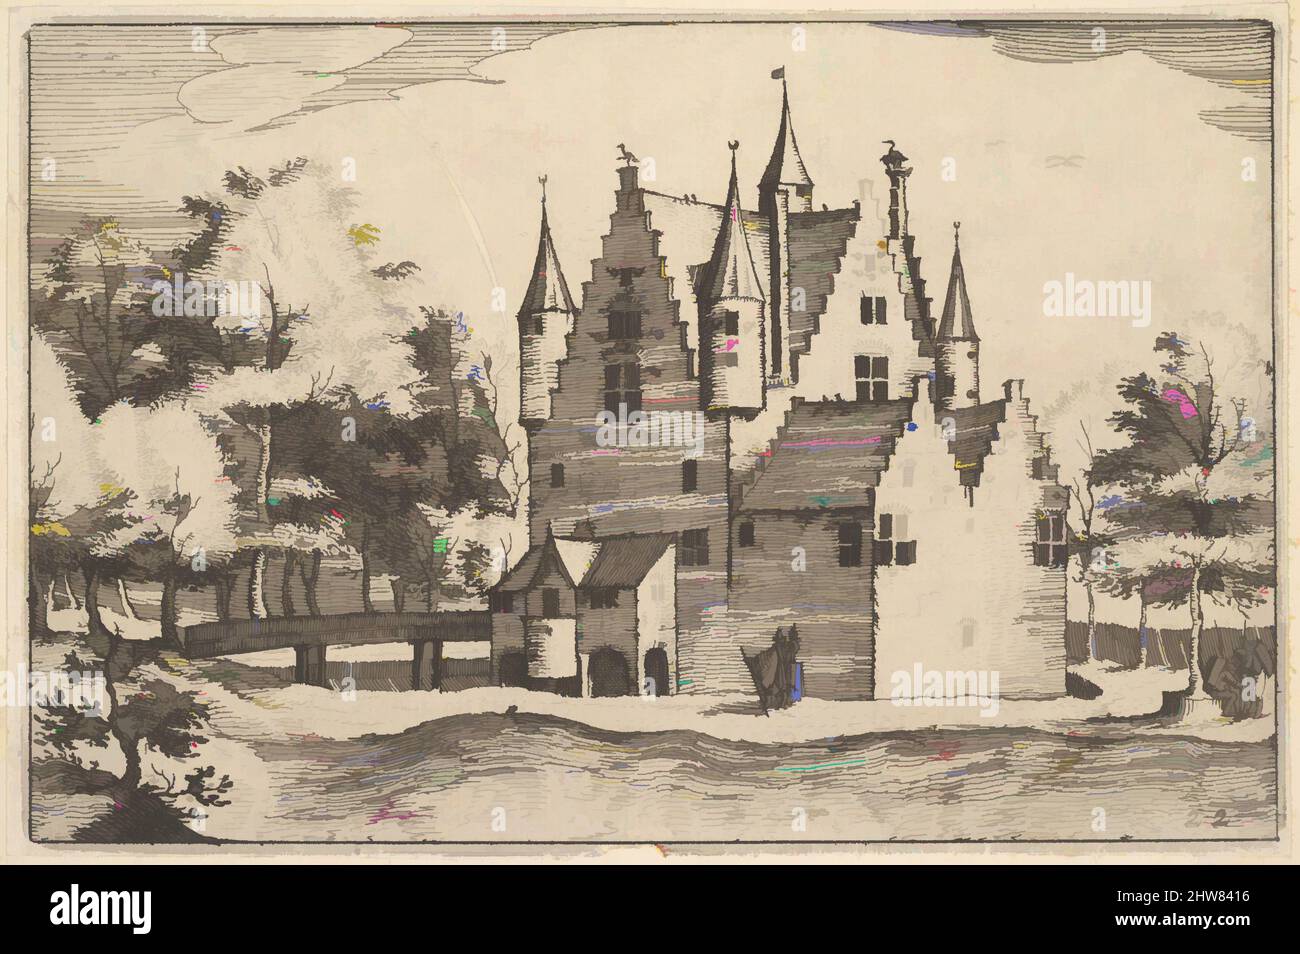 Art inspired by A Castle from Regiunculae et Villae Aliquot Ducatus Brabantiae, ca. 1610, Etching, Plate: 4 1/8 x 6 3/16 in. (10.5 x 15.7 cm), Prints, Claes Jansz. Visscher (Dutch, Amsterdam 1586–1652 Amsterdam), After The Master of the Small Landscapes (Netherlandish, 16th century, Classic works modernized by Artotop with a splash of modernity. Shapes, color and value, eye-catching visual impact on art. Emotions through freedom of artworks in a contemporary way. A timeless message pursuing a wildly creative new direction. Artists turning to the digital medium and creating the Artotop NFT Stock Photo